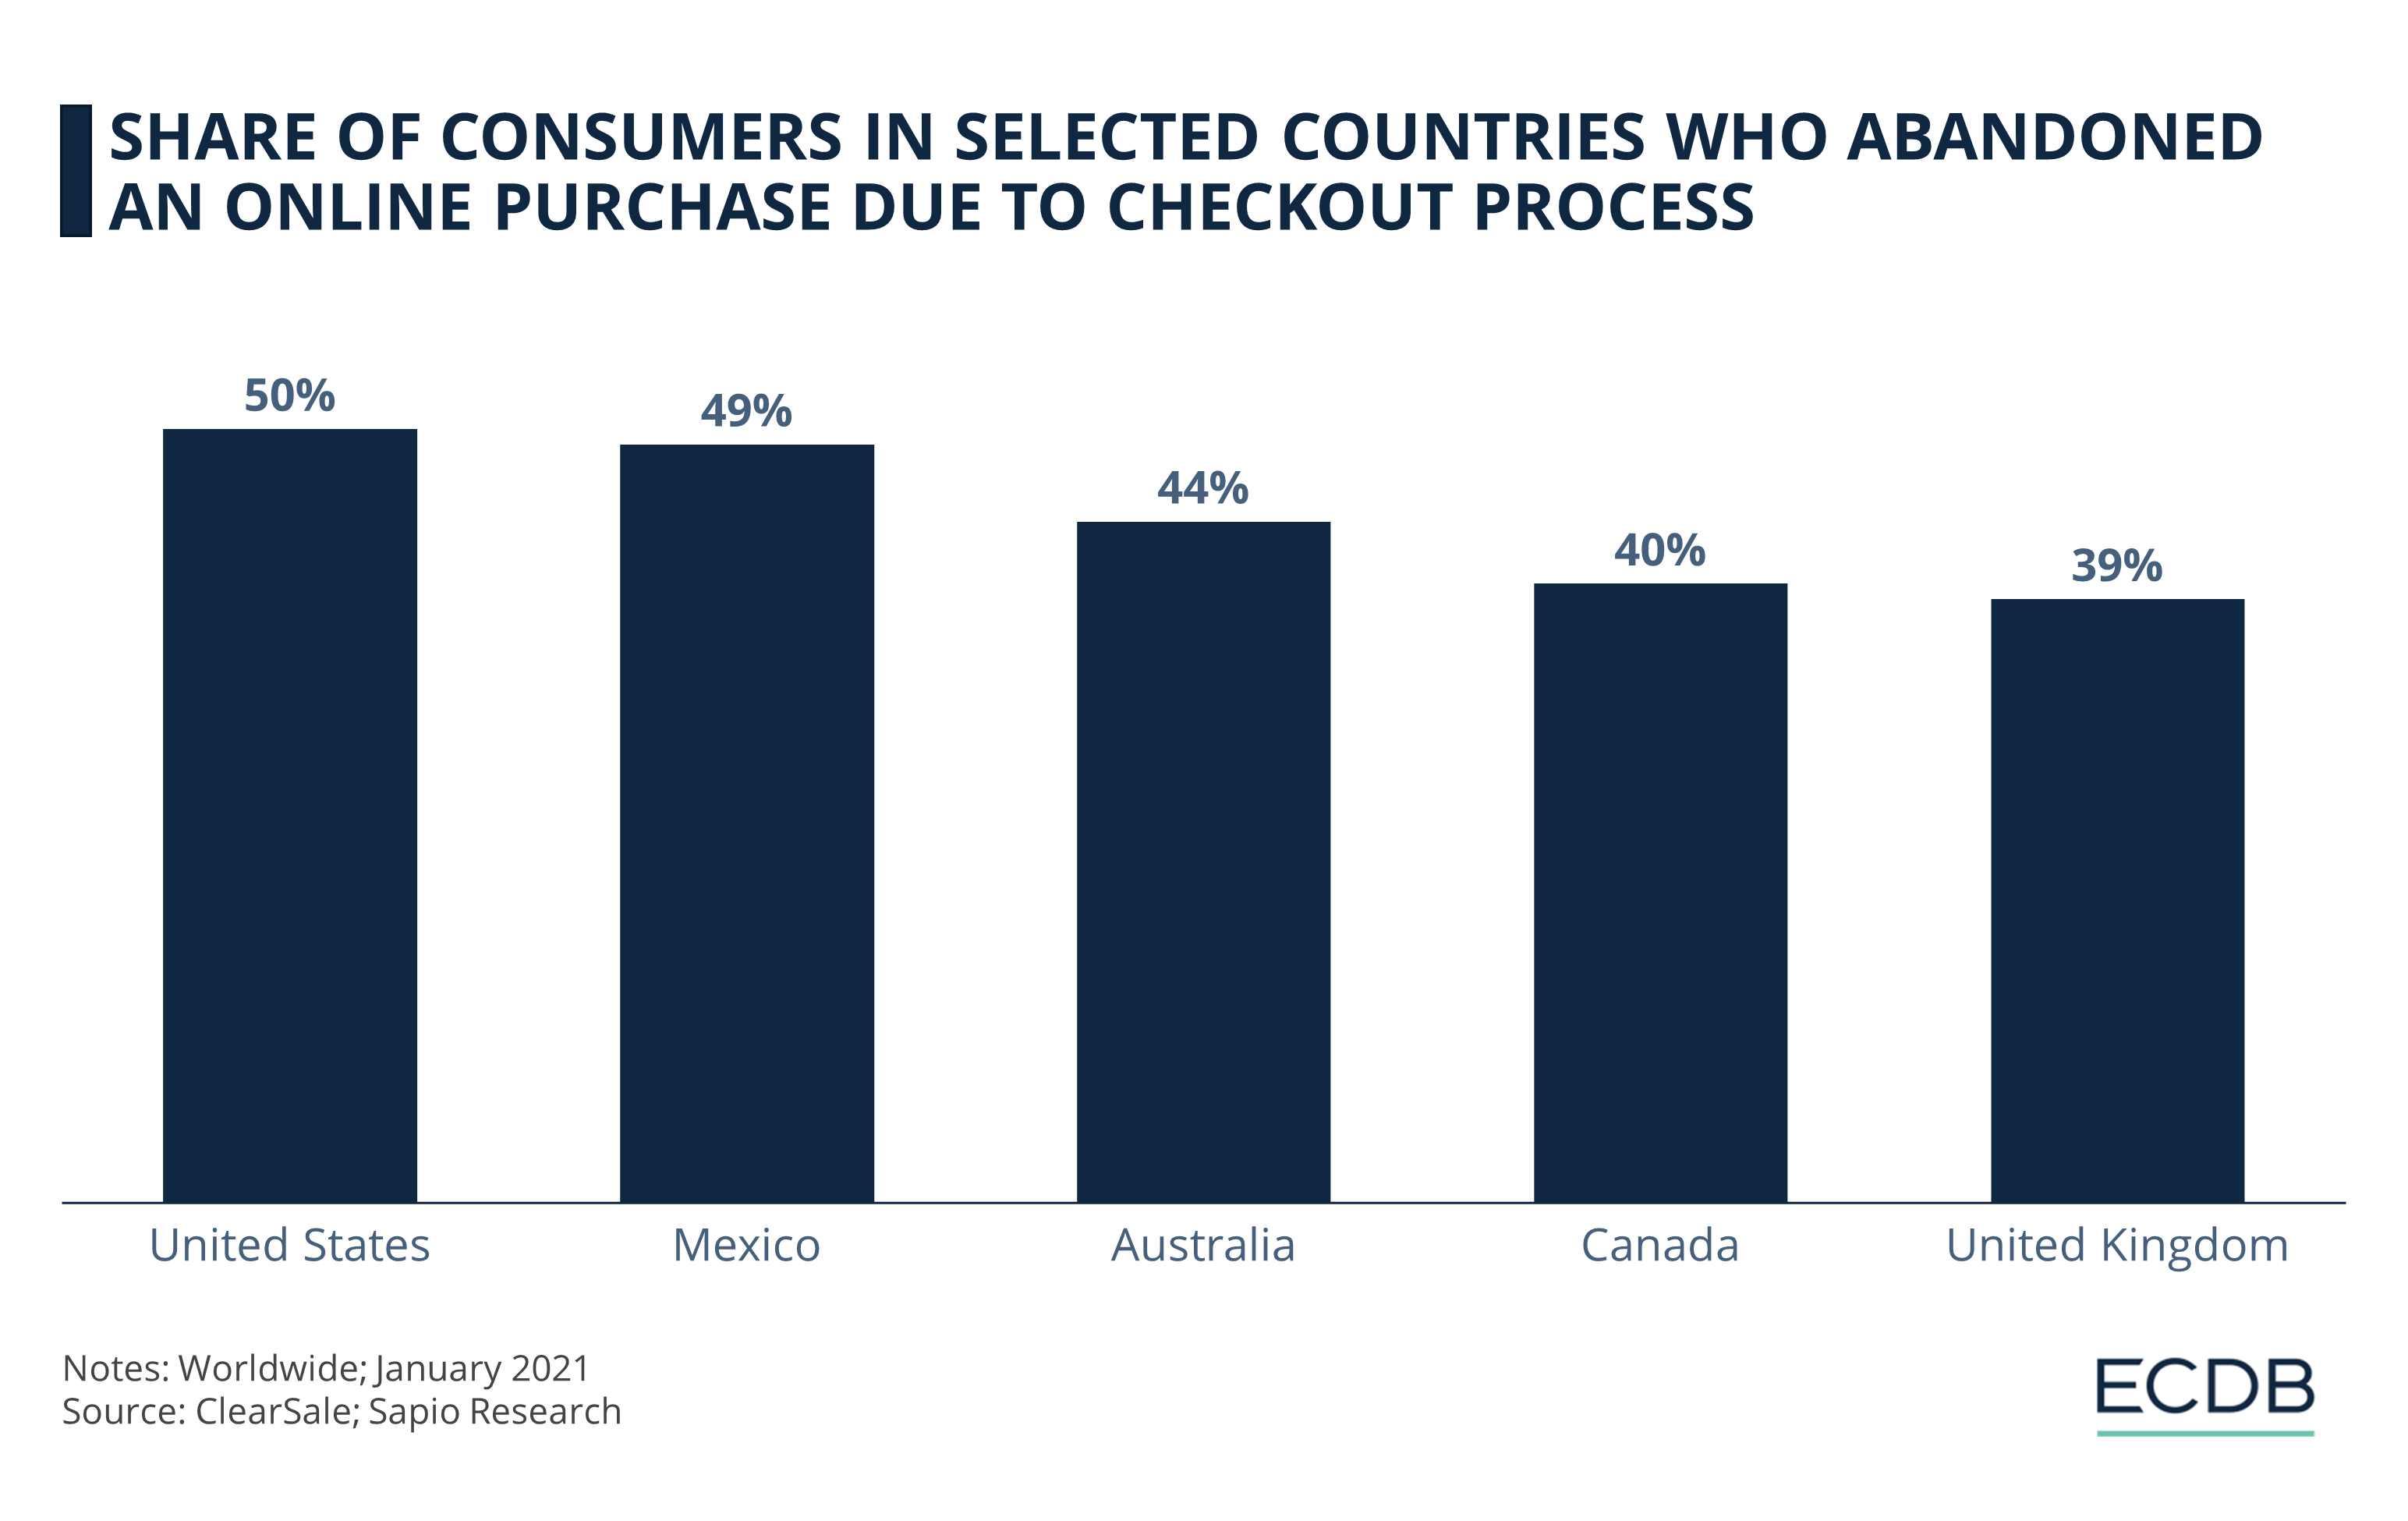 Share of Consumers in Selected Countries Who Abandoned an Online Purchase Due to Checkout Process